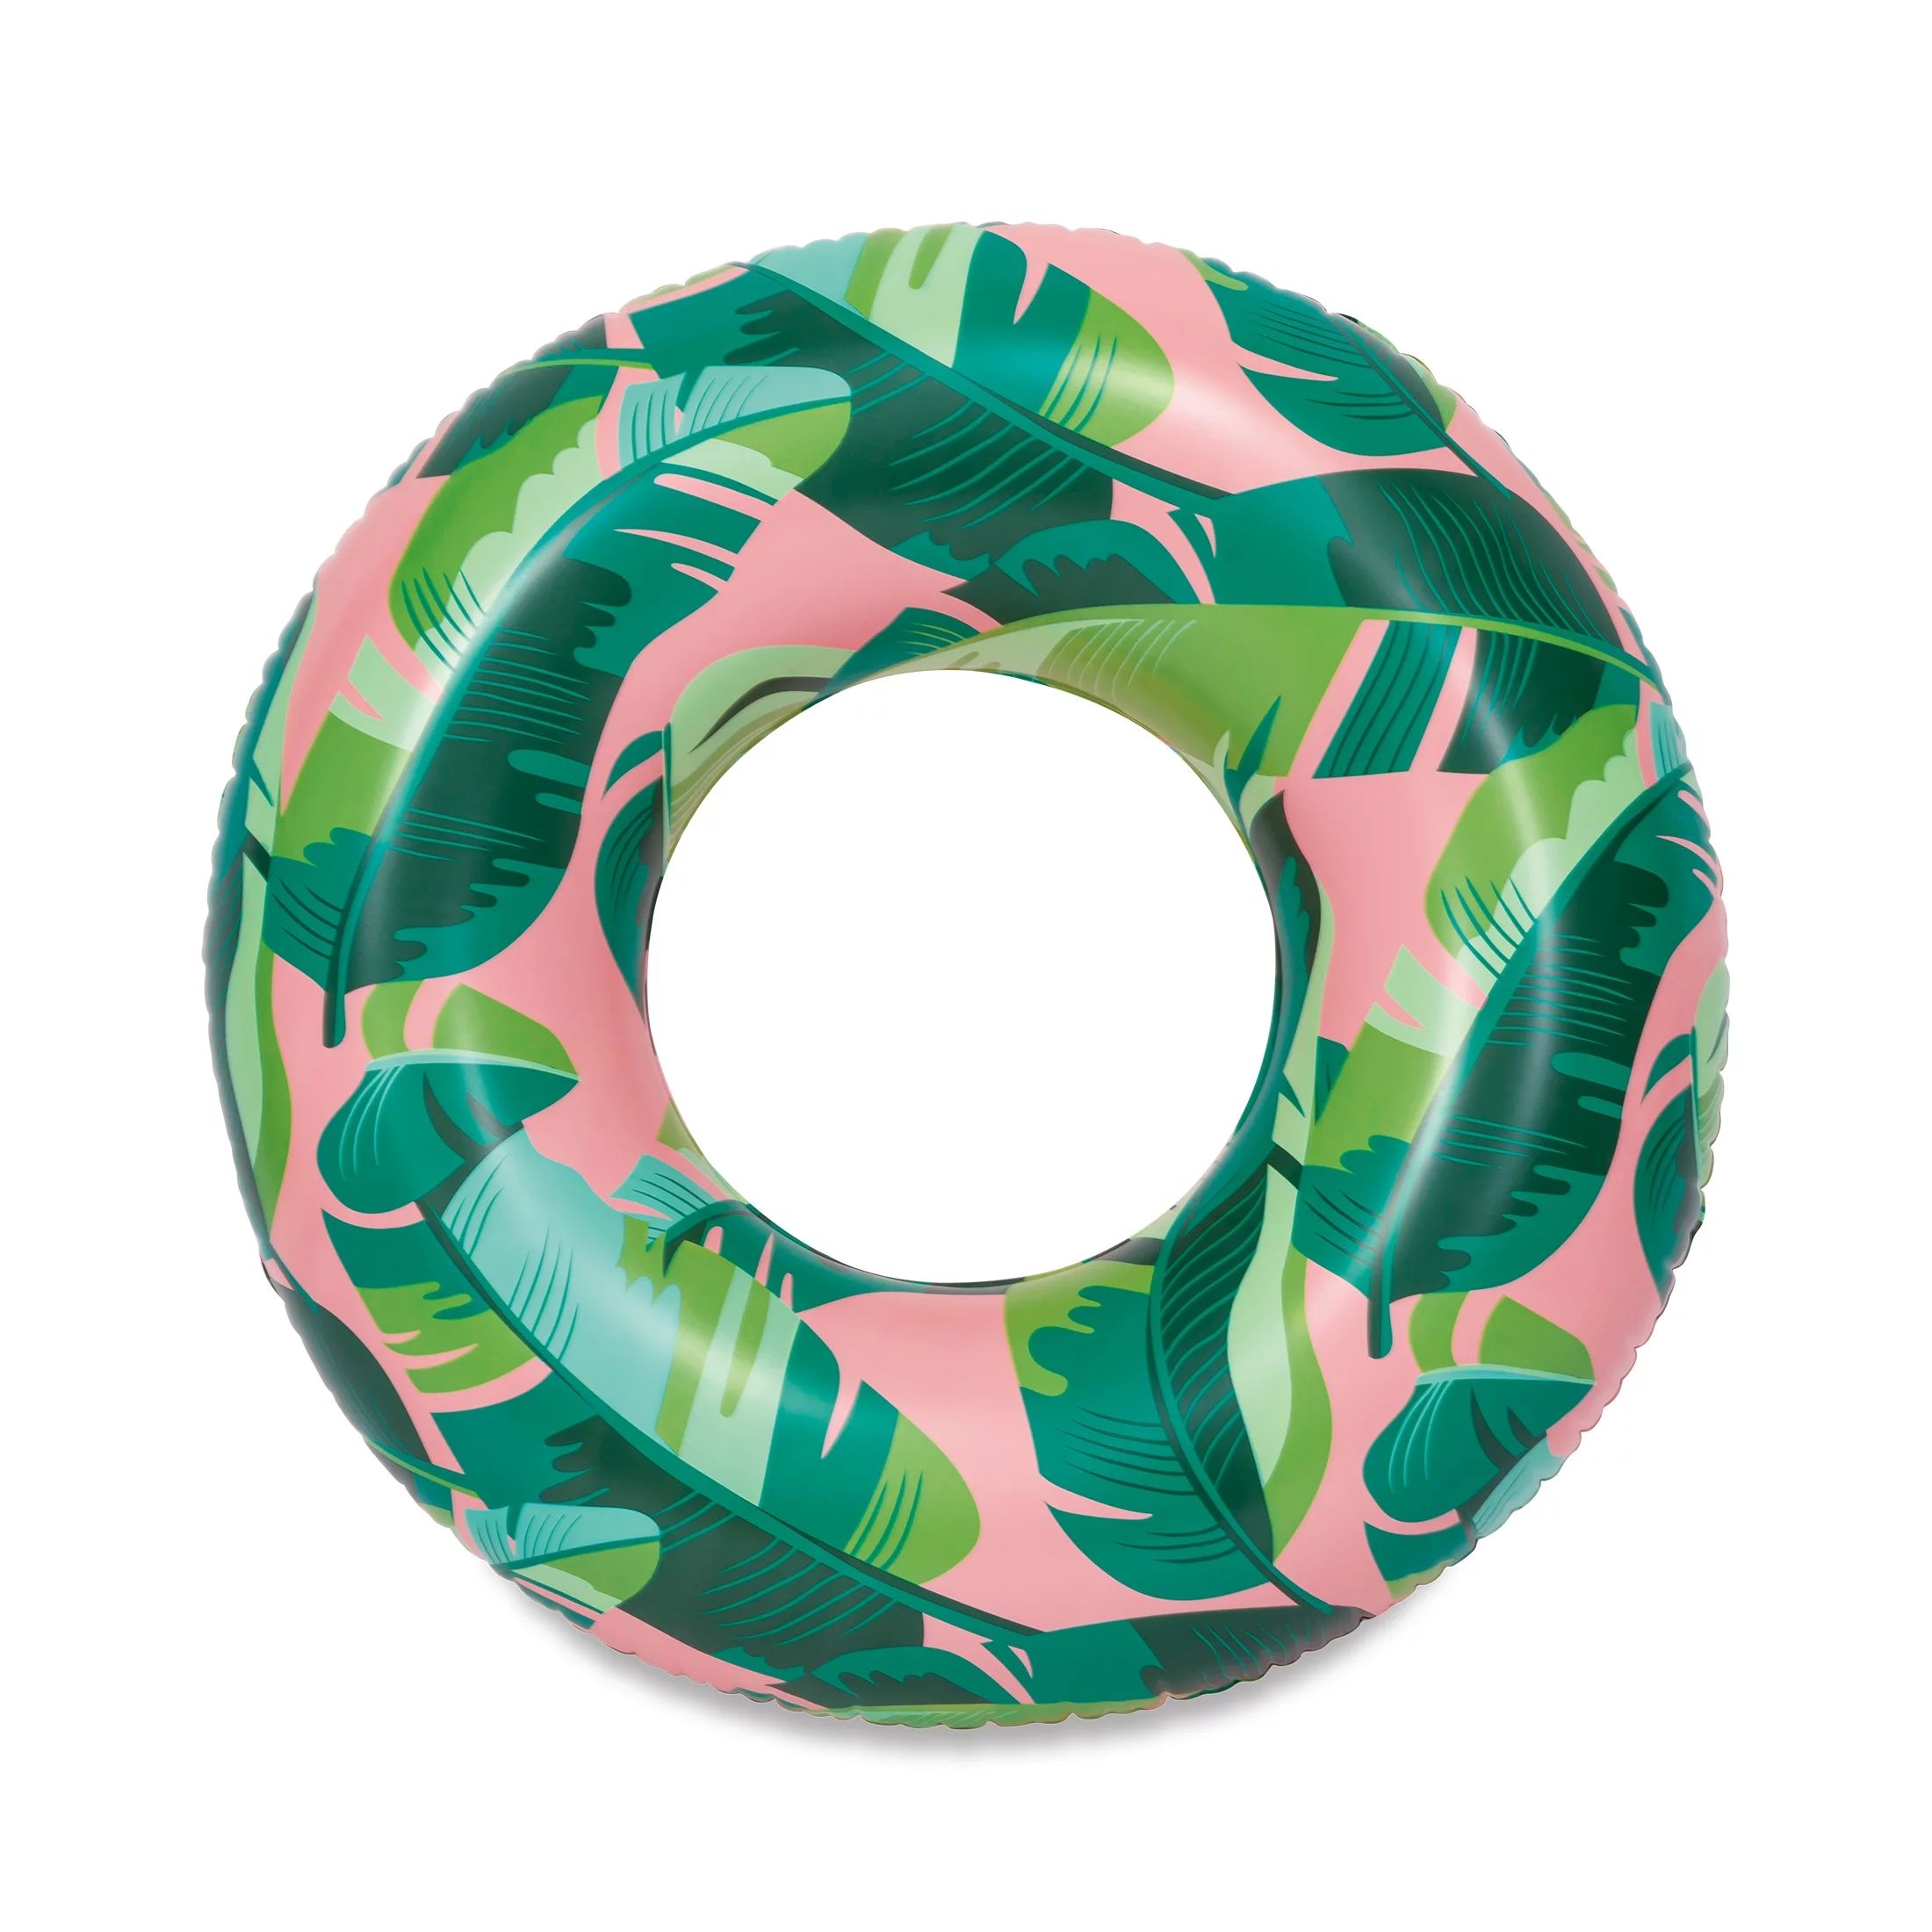 Play Day Inflatable Tropical Swim Tube Pool Float, Green & Pink Prints, for Kids and Adults, Unis... | Walmart (US)